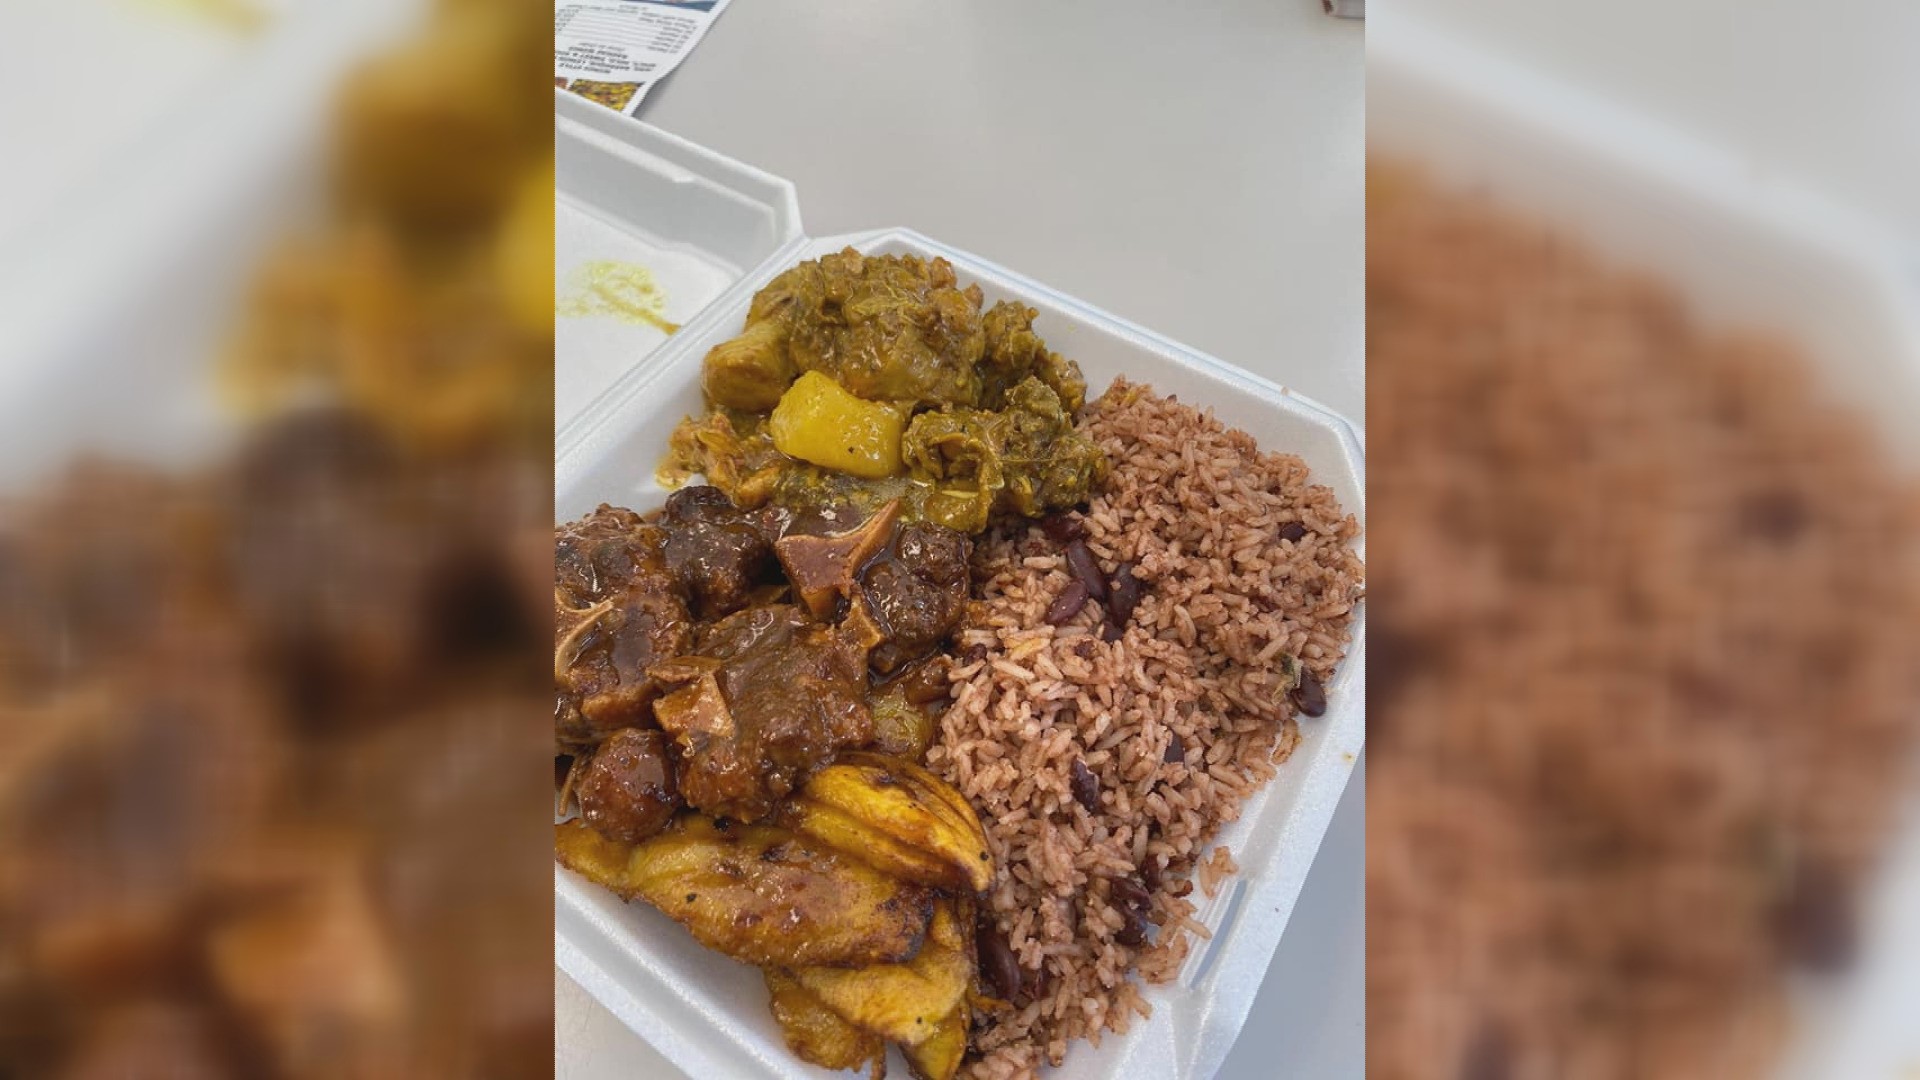 Island Pot sells dozens of different types of traditional Jamaican dishes